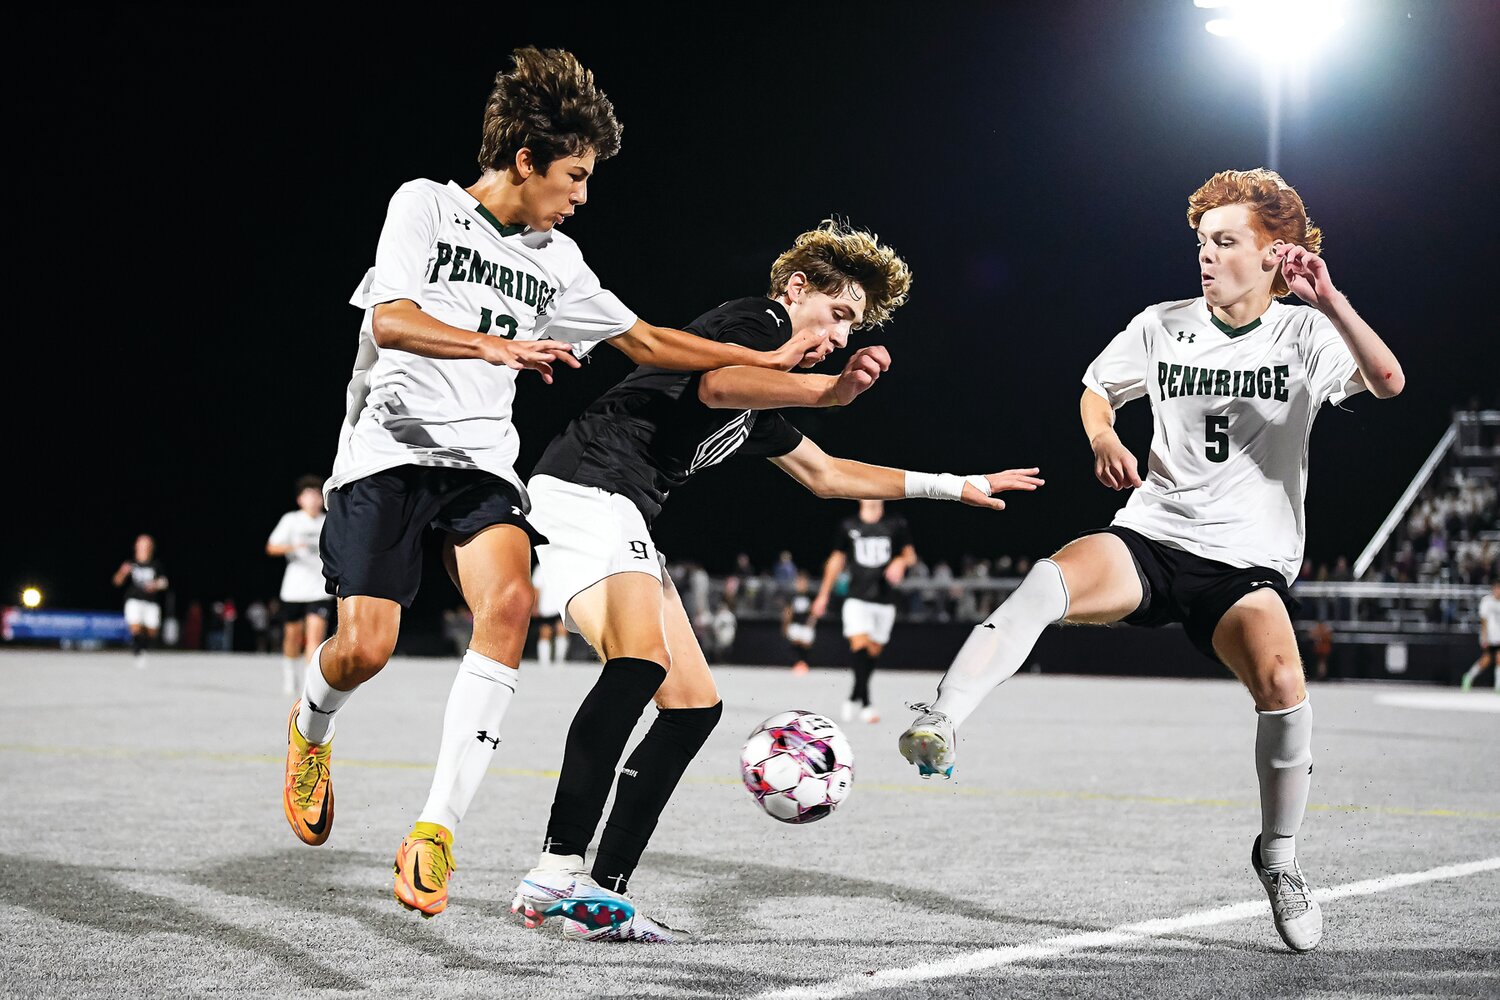 Pennridge’s Parker Annan and Jacks de Meester press on offense as Faith Christian’s Colin Moyer tries to clear the zone in the second half.